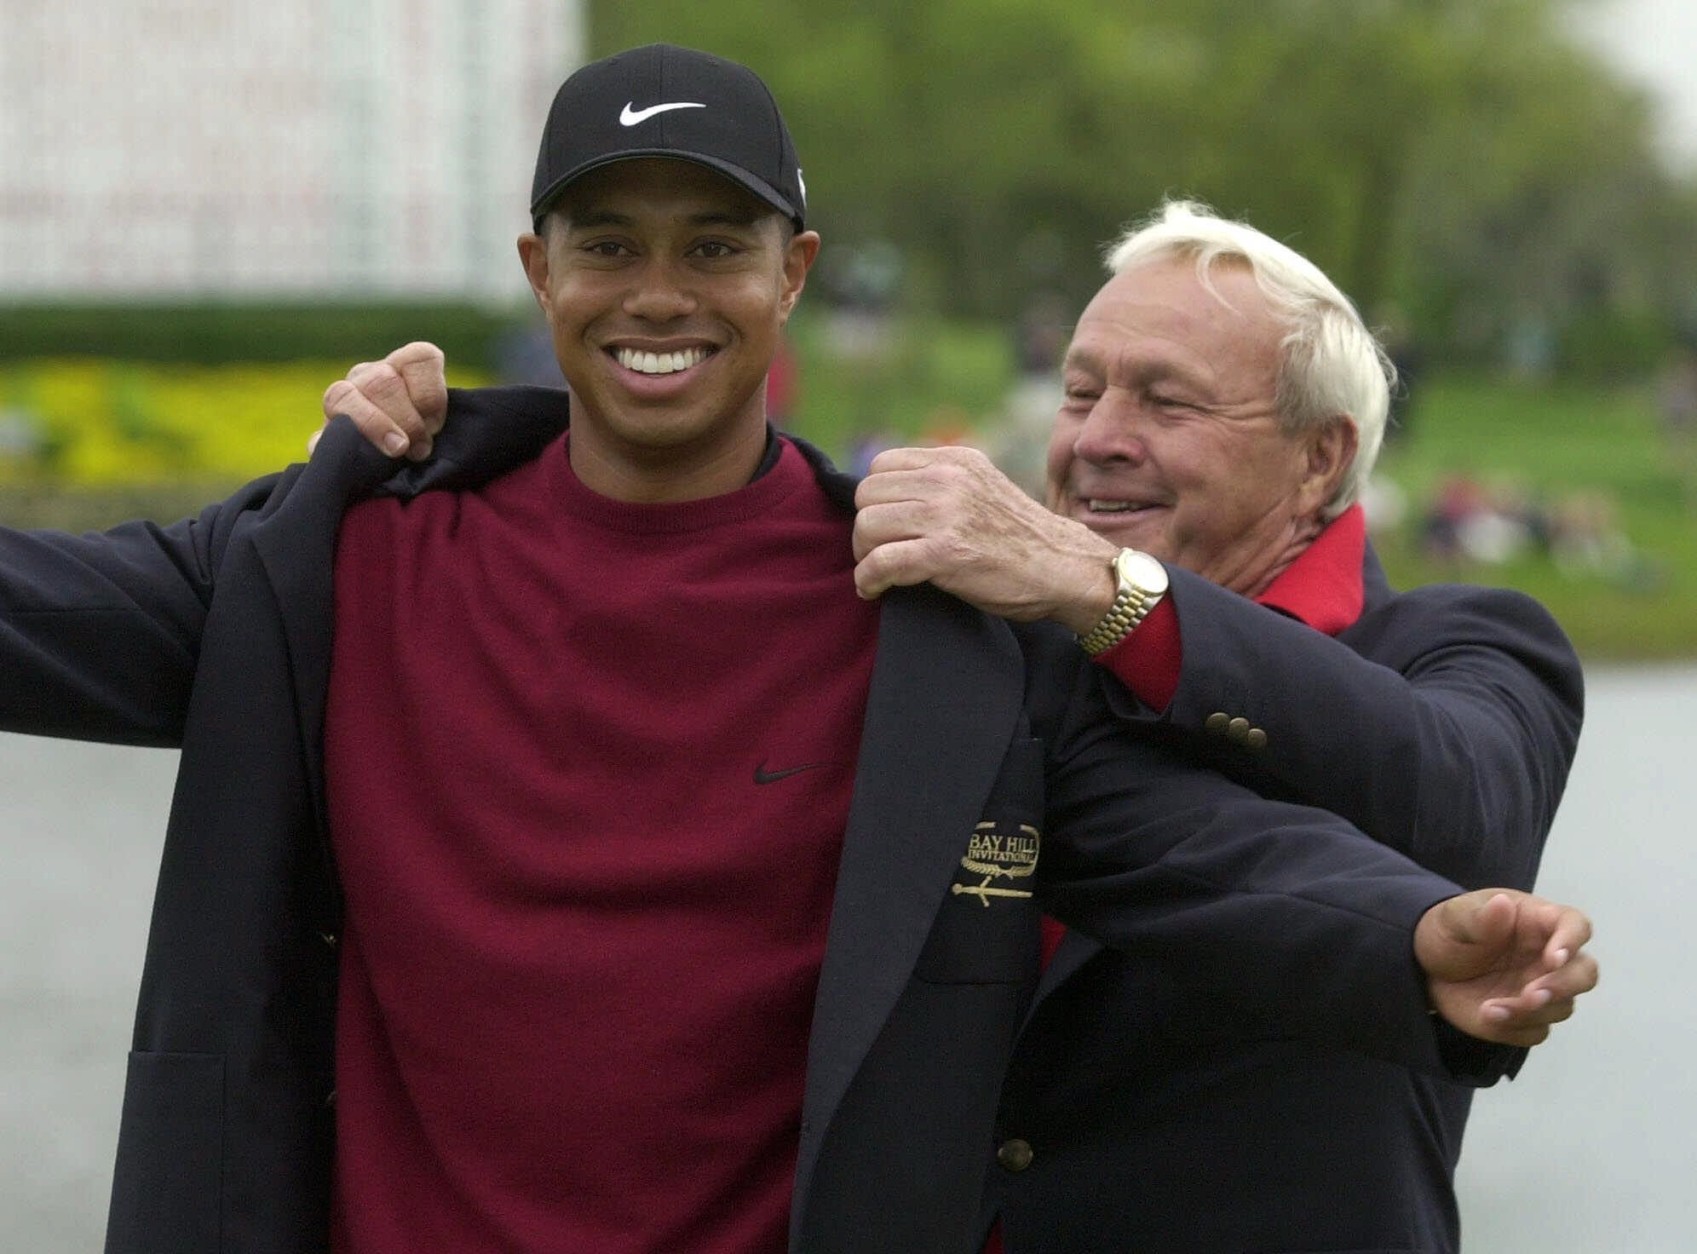 File-This March 18, 2001, file photo shows Tiger Woods, left, being helped into his jacket for winning the Bay Hill Invitational by tournament host Arnold Palmer  in Orlando, Fla. Woods Palmer, who made golf popular for the masses with his hard-charging style, incomparable charisma and a personal touch that made him known throughout the golf world as "The King," died Sunday, Sept. 25, 2016, in Pittsburgh. He was 87.  (AP Photo/Scott Audette, File)